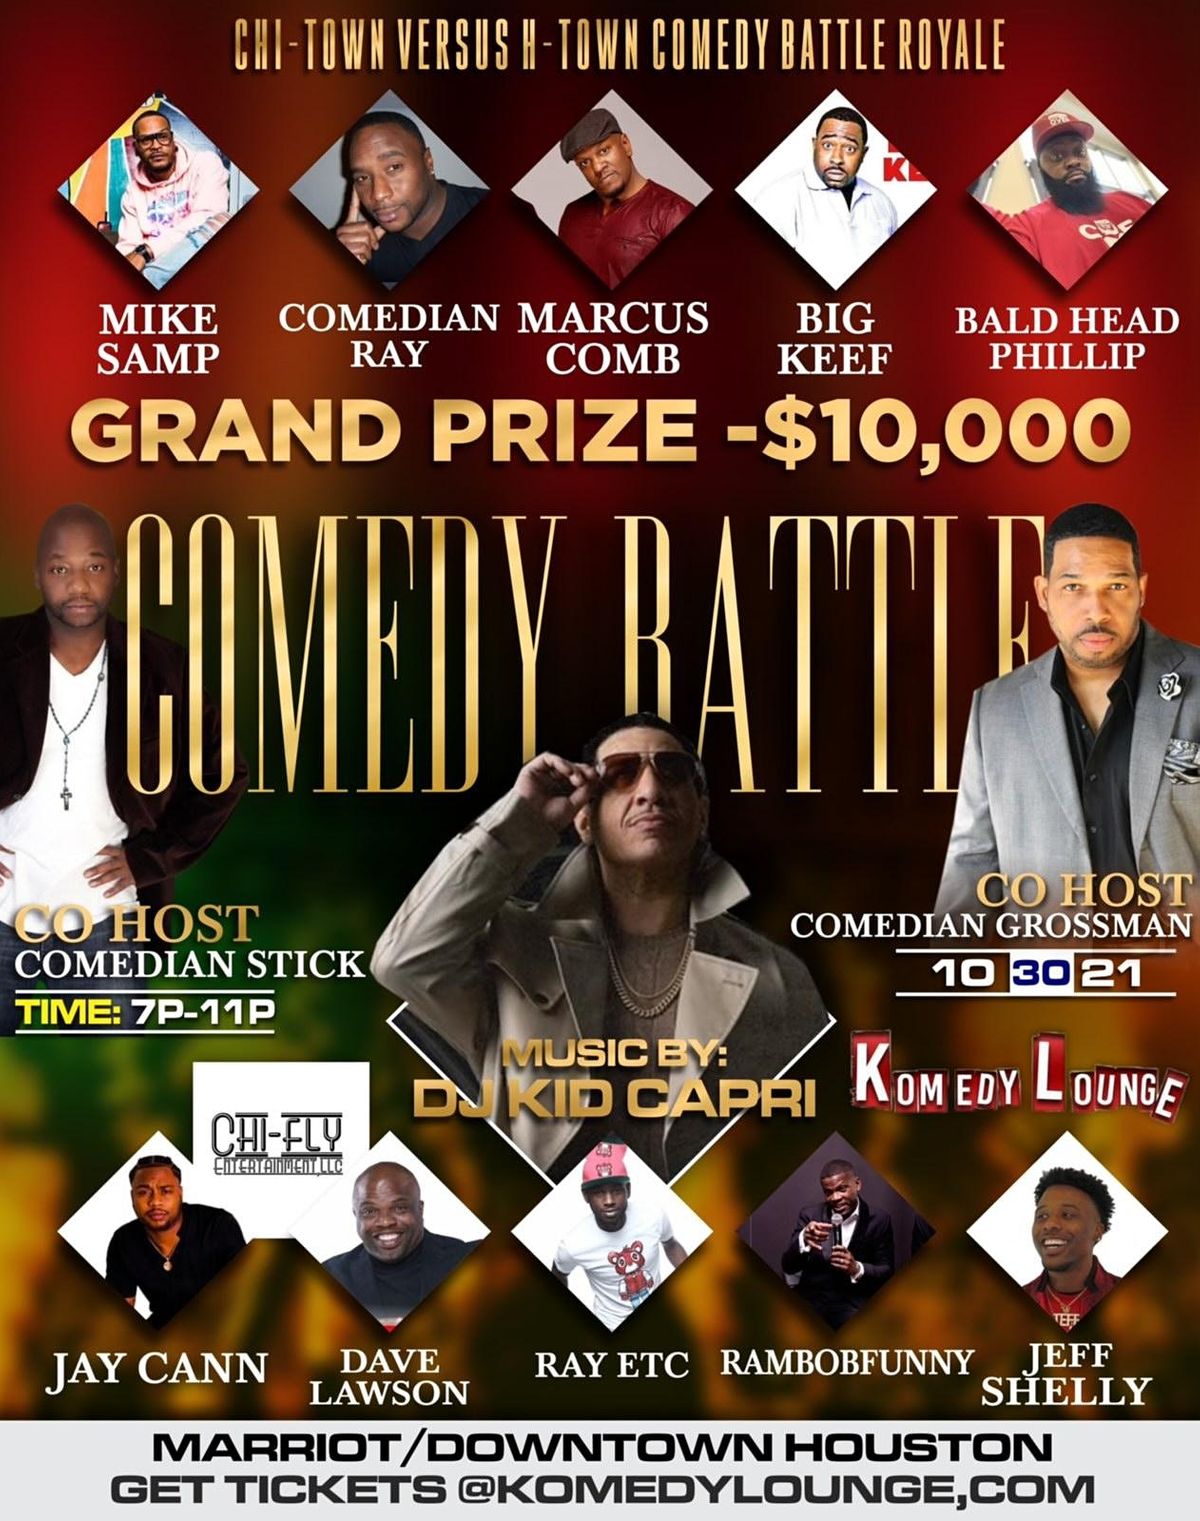 Chi-Town vs H-Town Comedy Battle Royale